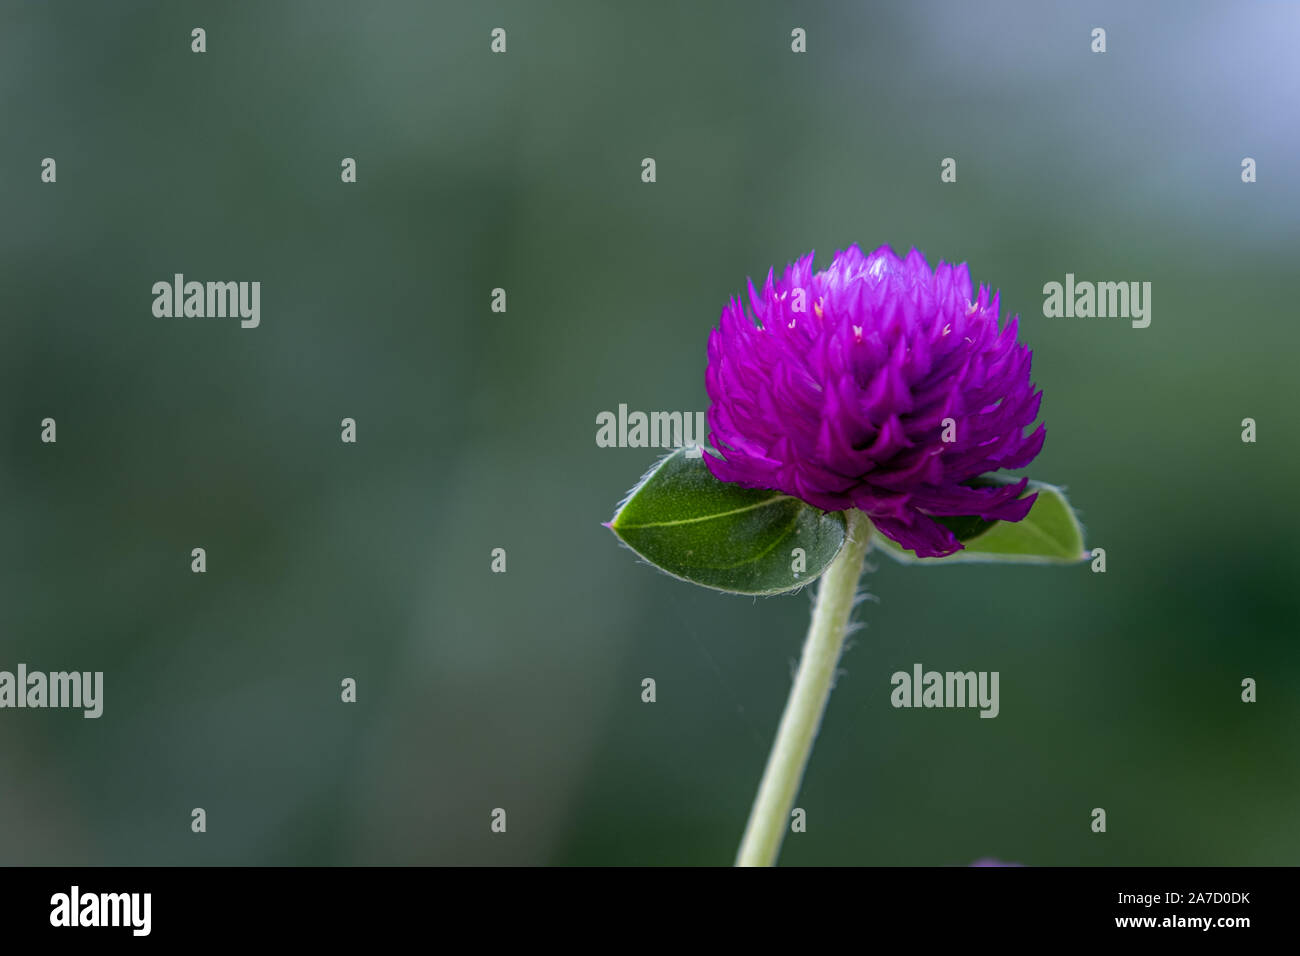 Globe Amaranth / Bachelor Button. Flowers are magenta, white, pink and light purple. Popular plant as a home decoration. Stock Photo